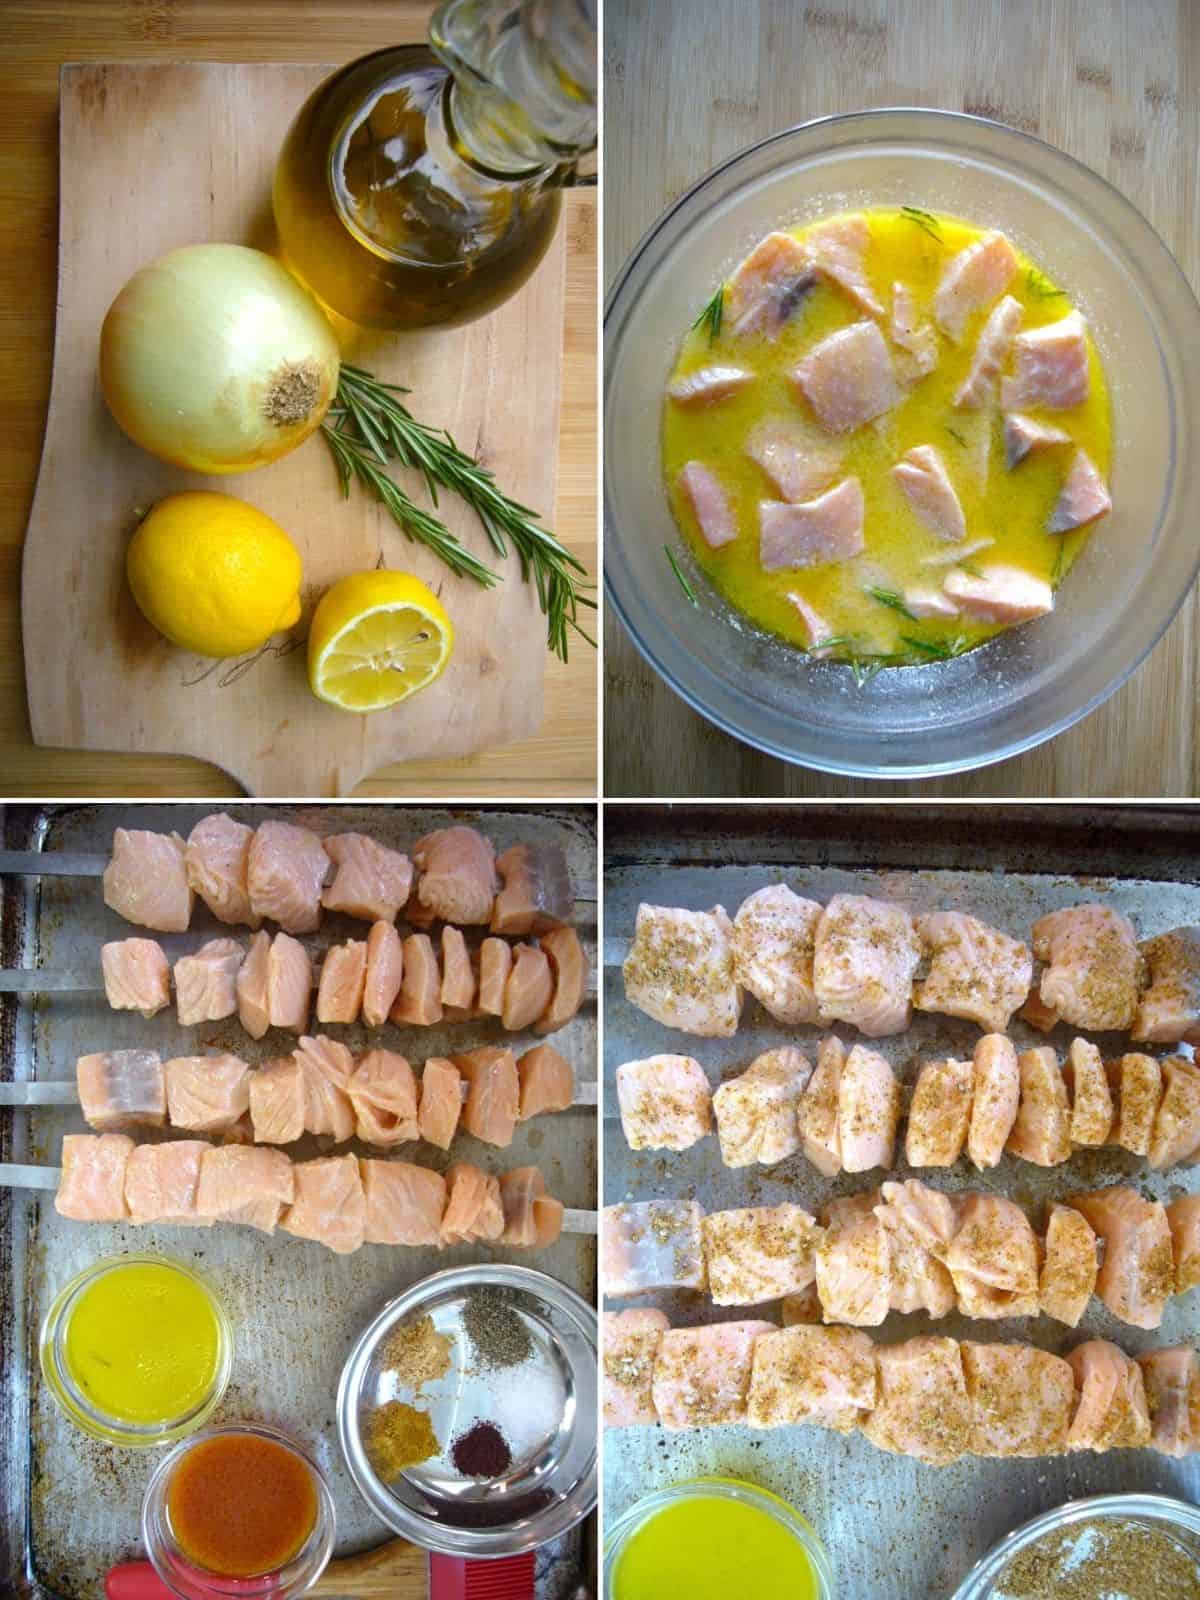 Step by step preparation of fish kabobs